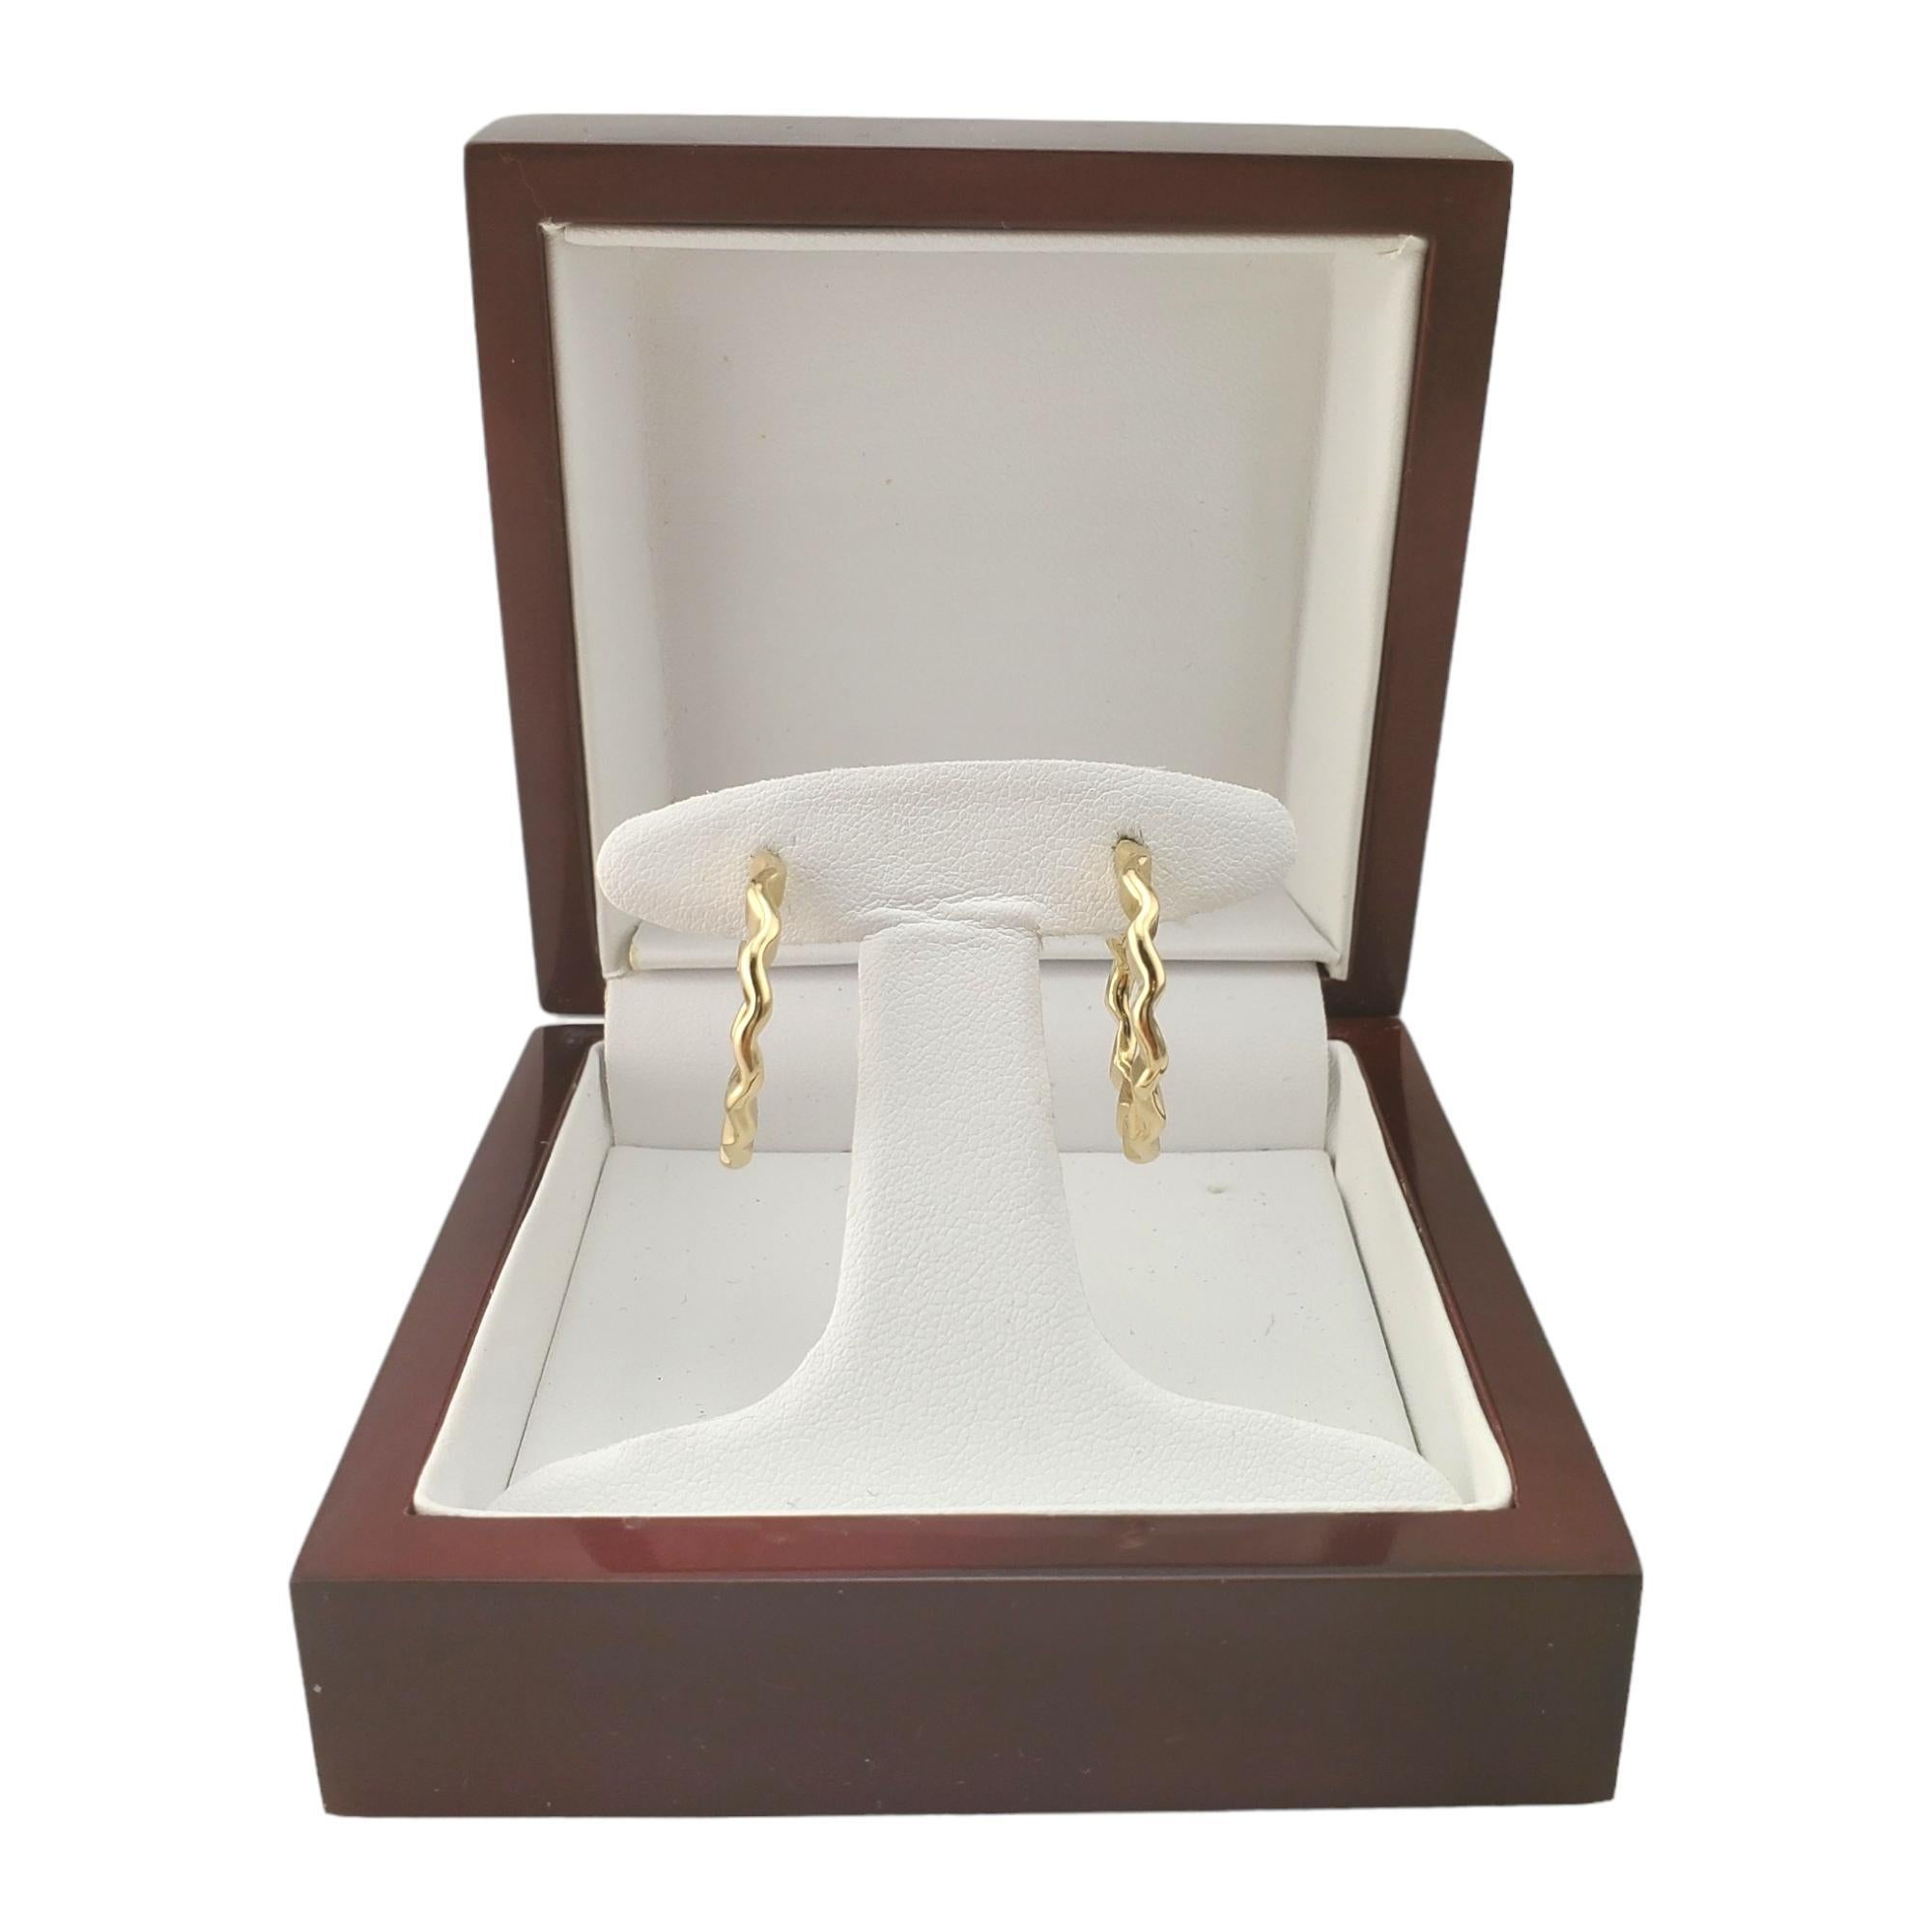 14K Yellow Gold Hoop Earrings with Crimped Wavy Design #17305 For Sale 2